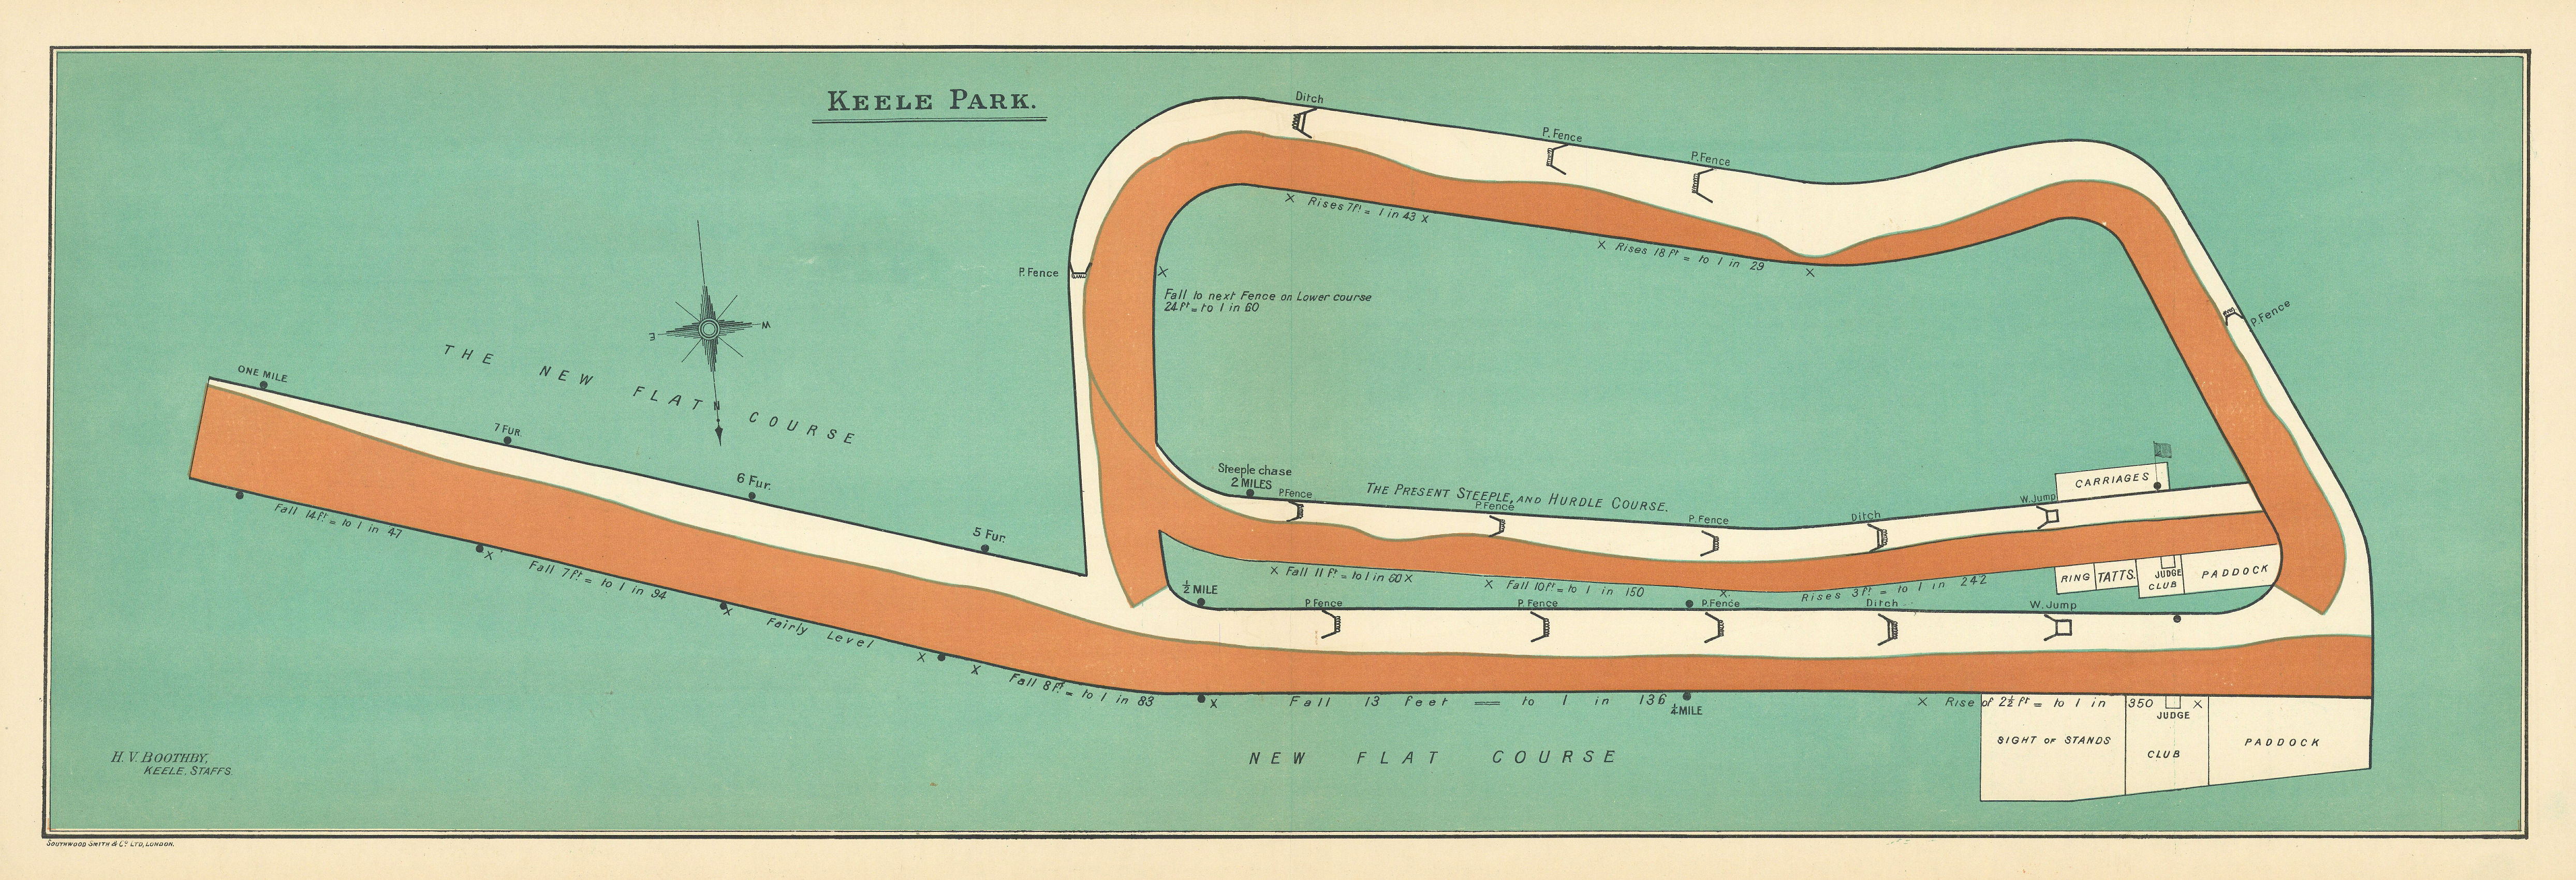 Keele Park racecourse, Staffordshire. Closed 1906. BAYLES 1903 old antique map